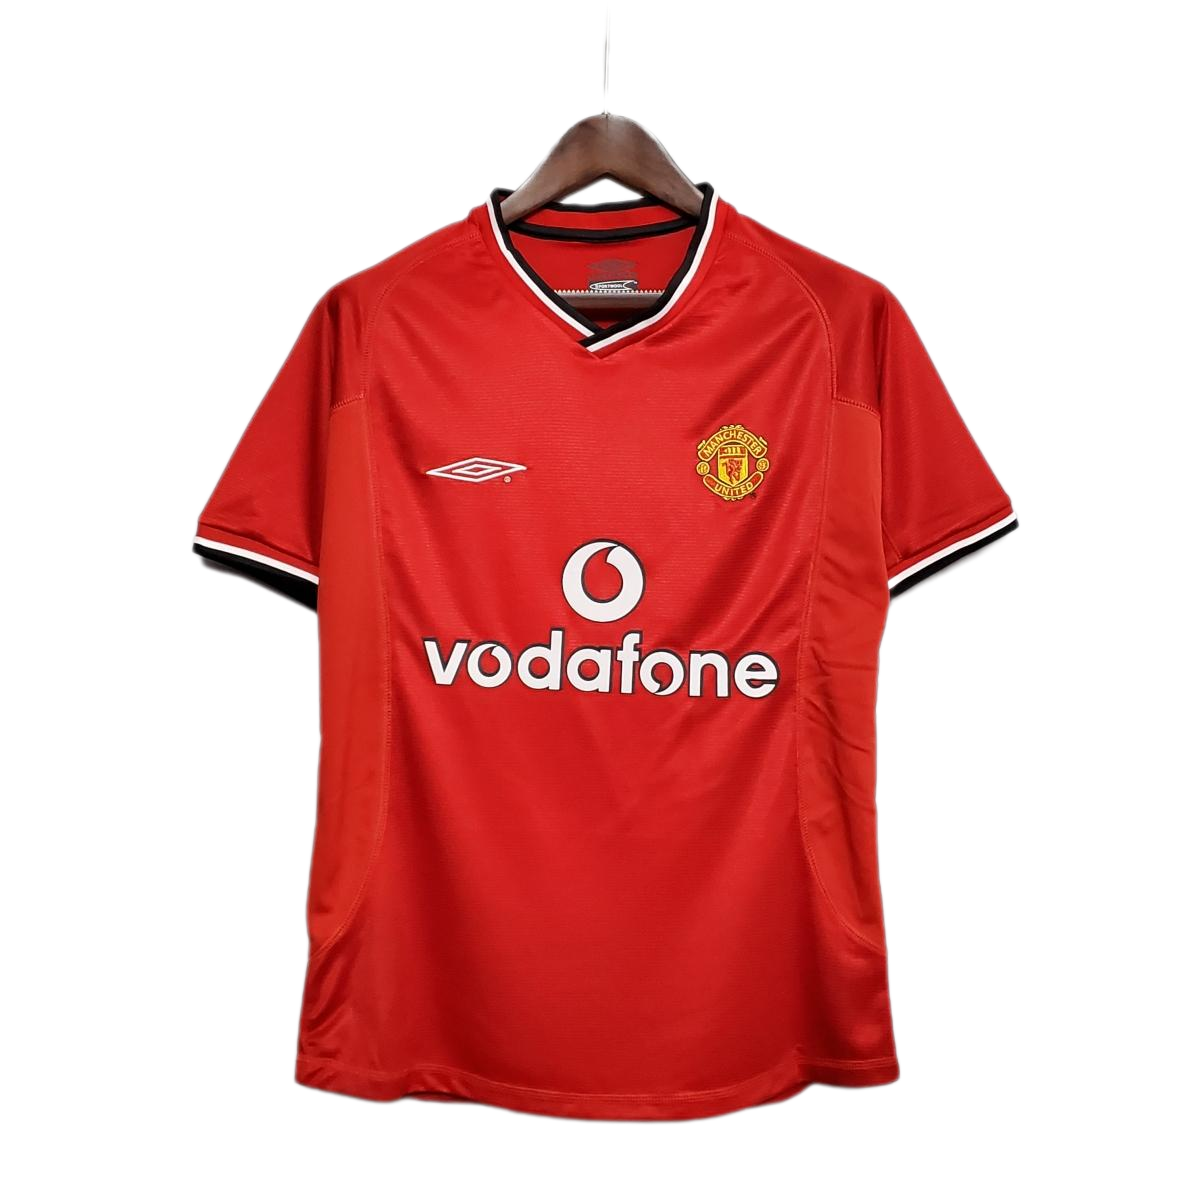 Retro 00/01 Manchester United Home Soccer Jersey